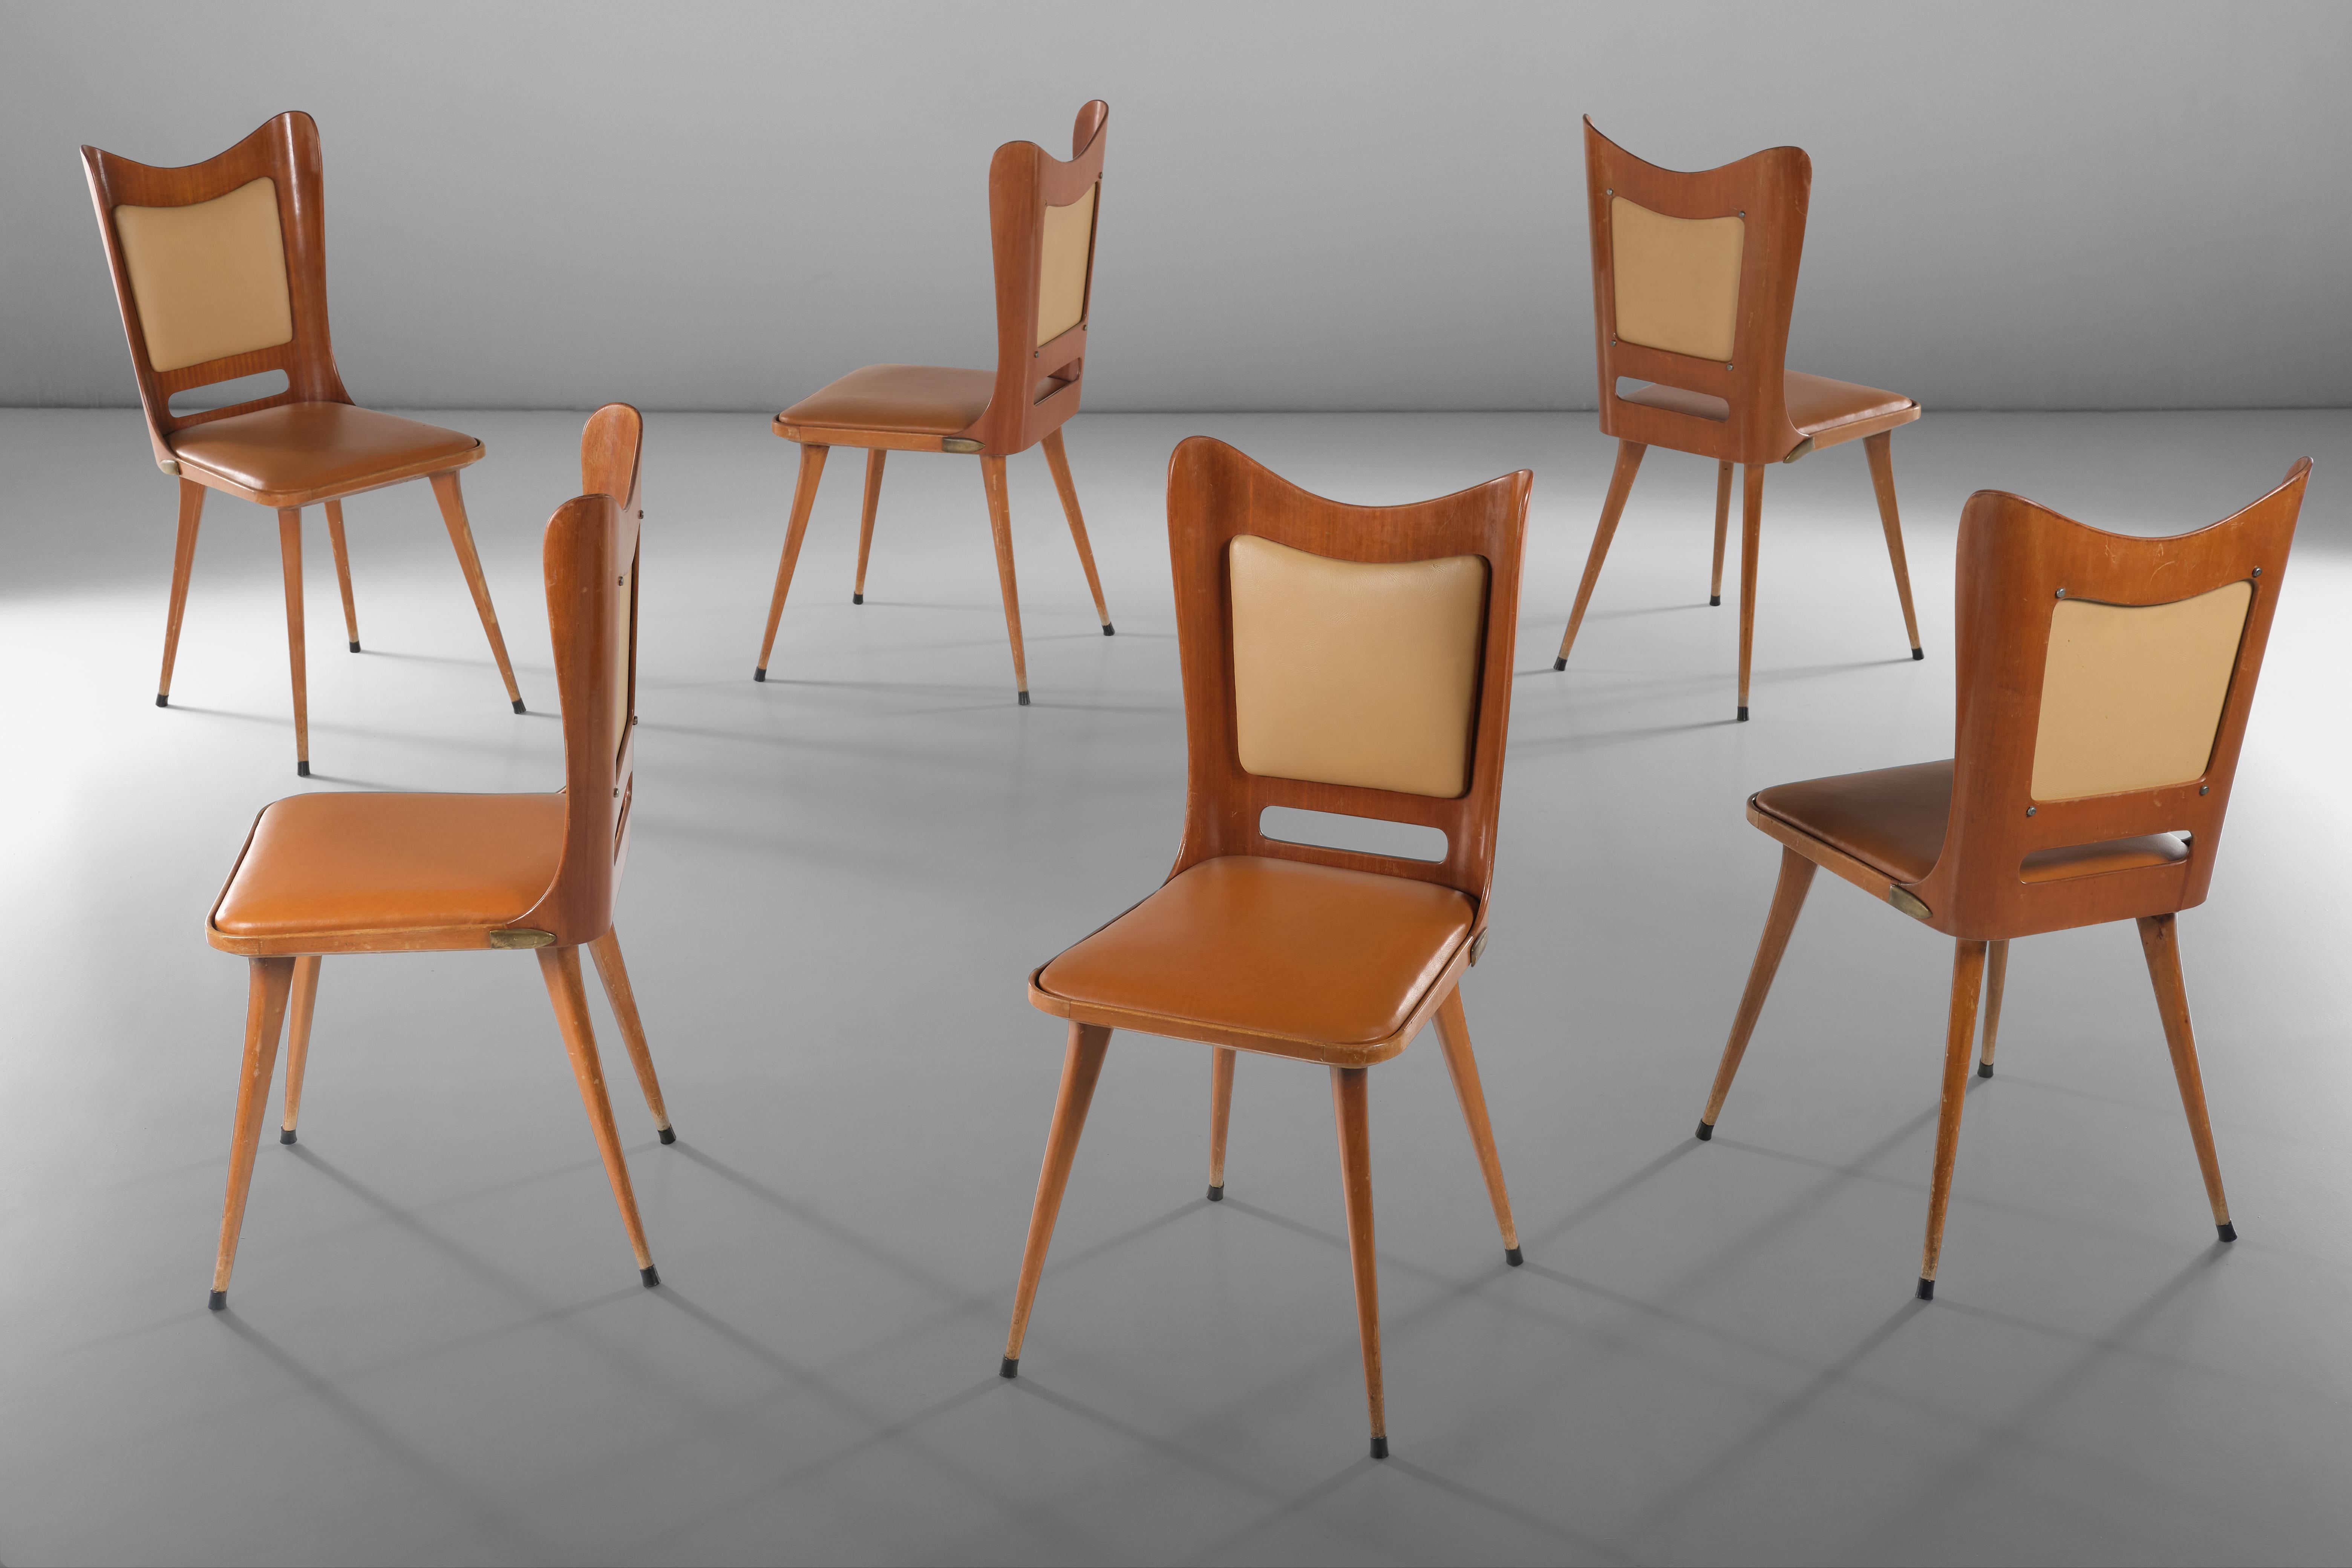 A simple but rare and classic set from postwar Italian craftsmanship, this set of six chairs features a structure of wood and curved plywood, combined in a play of lines that lightens and intrigues the figure as a whole. The color combination